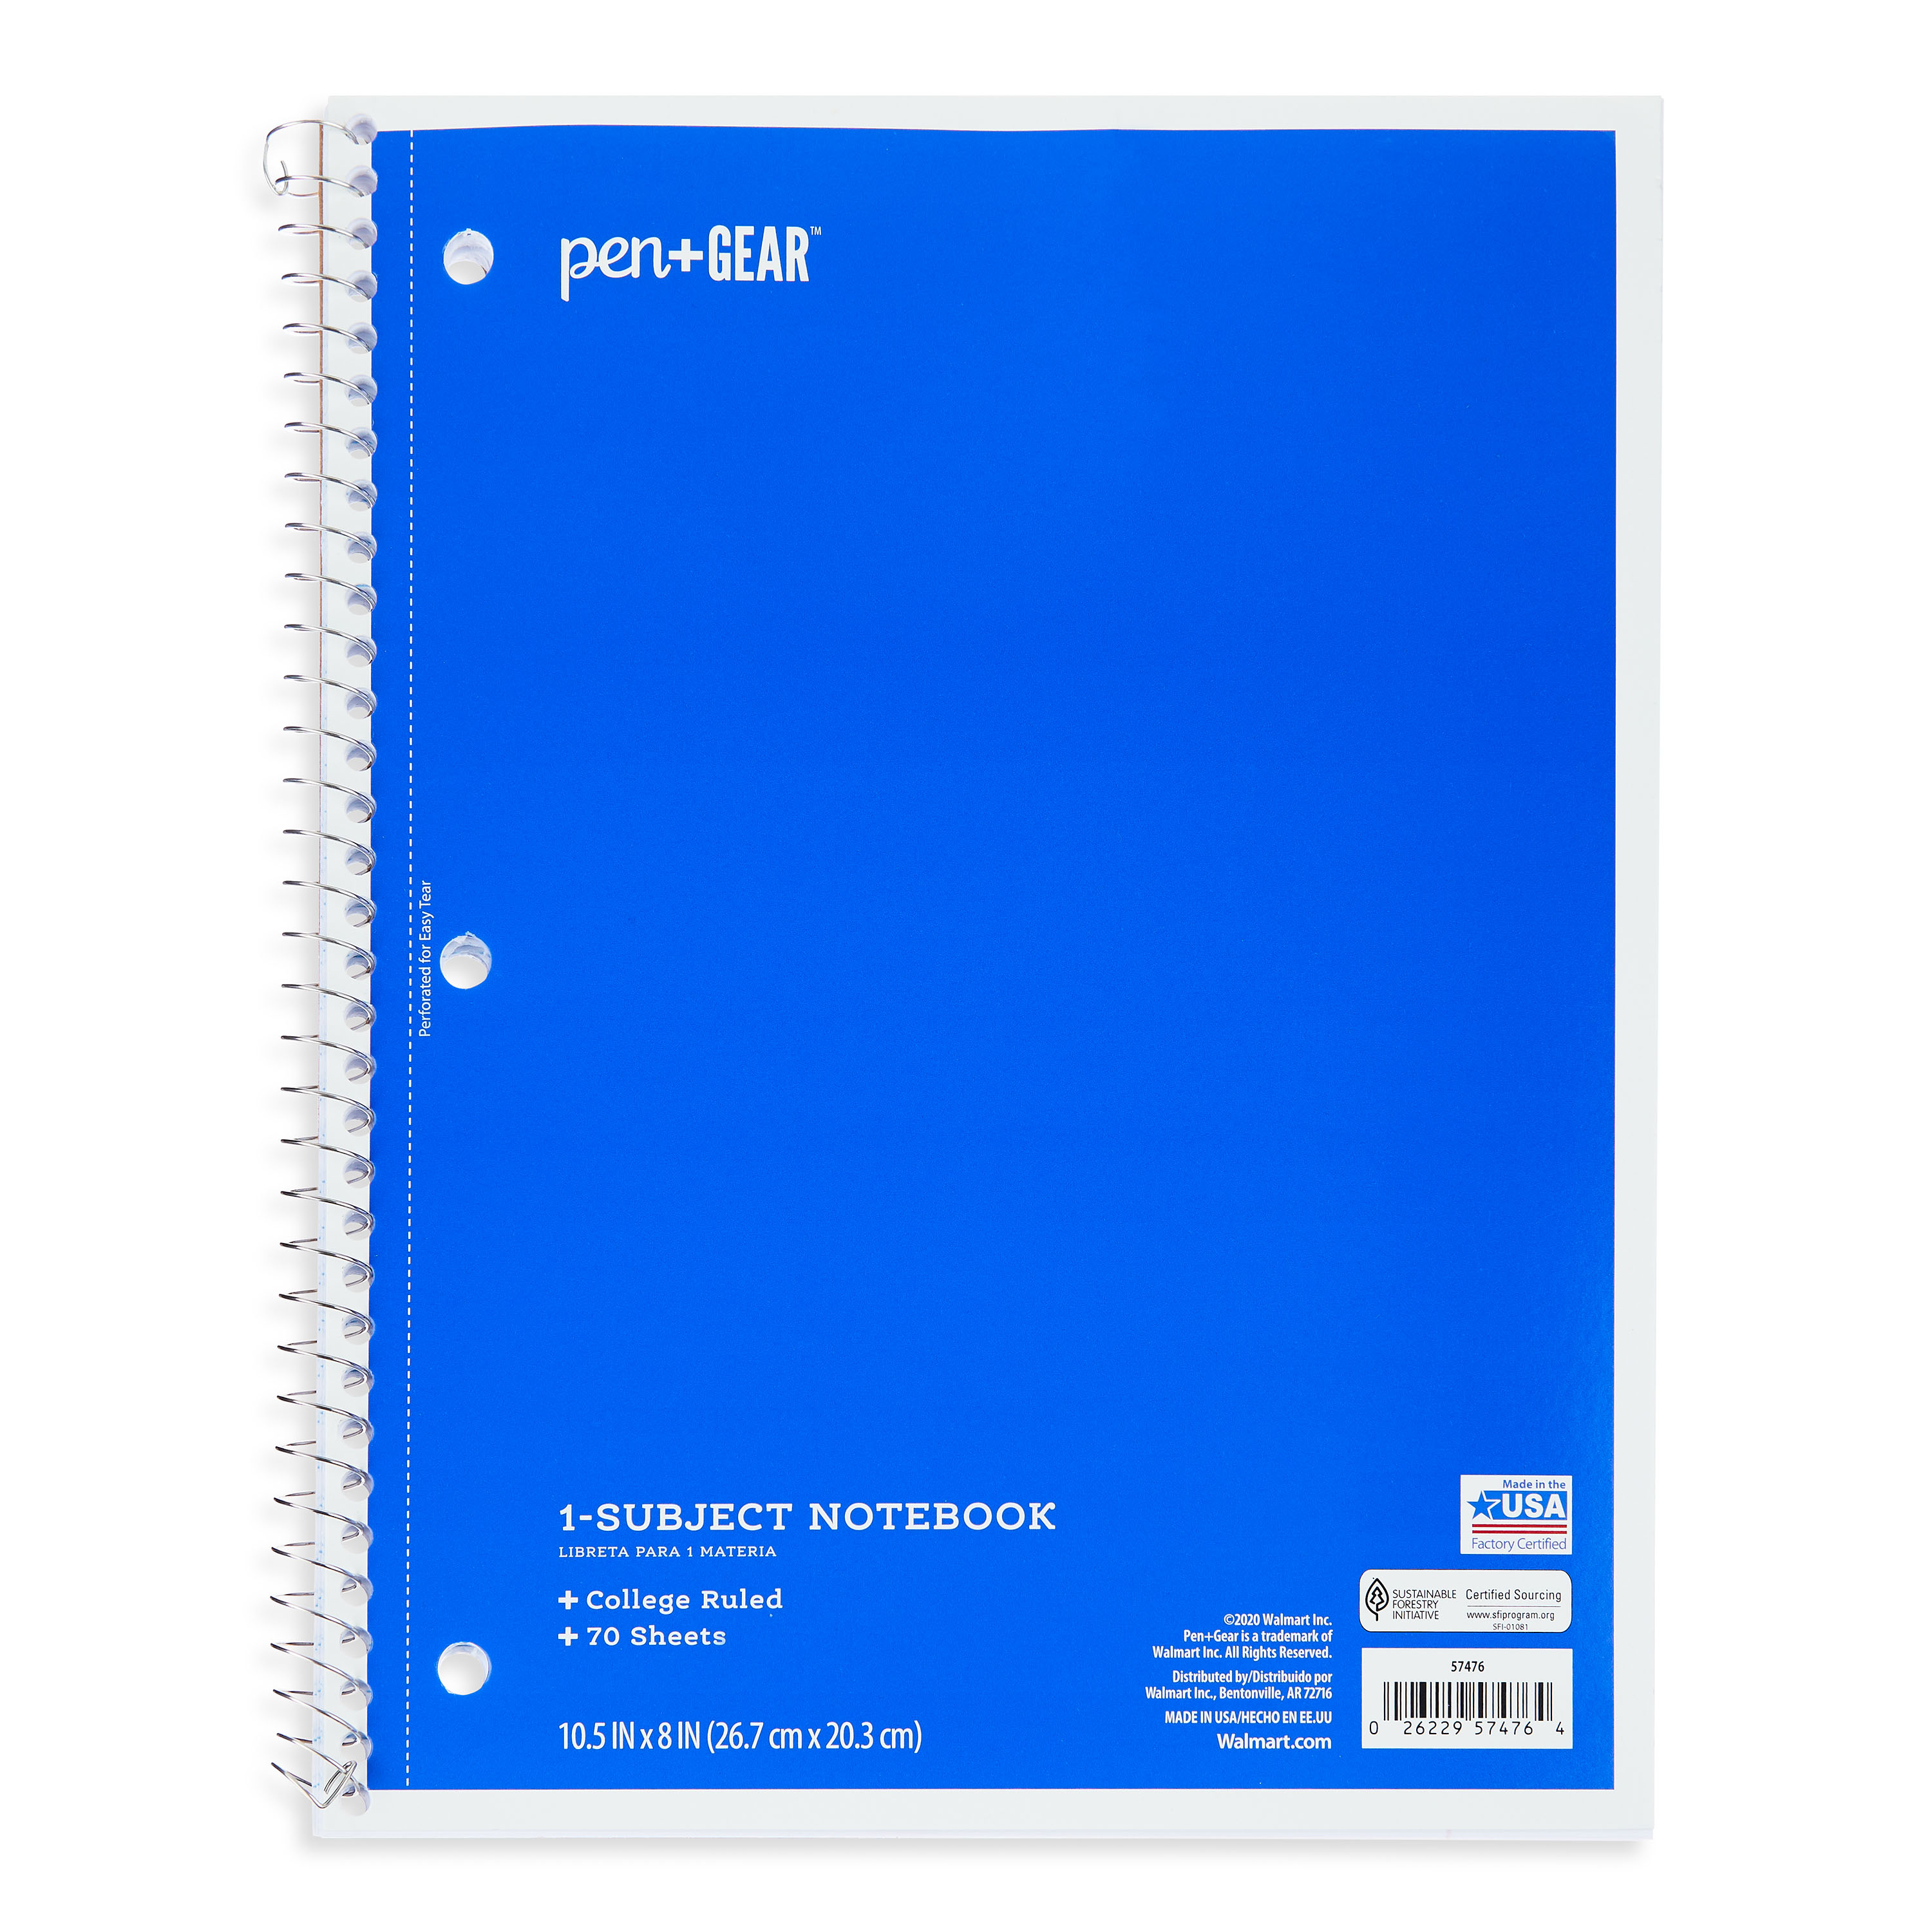 Pen + Gear 1-Subject Notebook, College Ruled, Blue, 70 Sheets - image 1 of 6